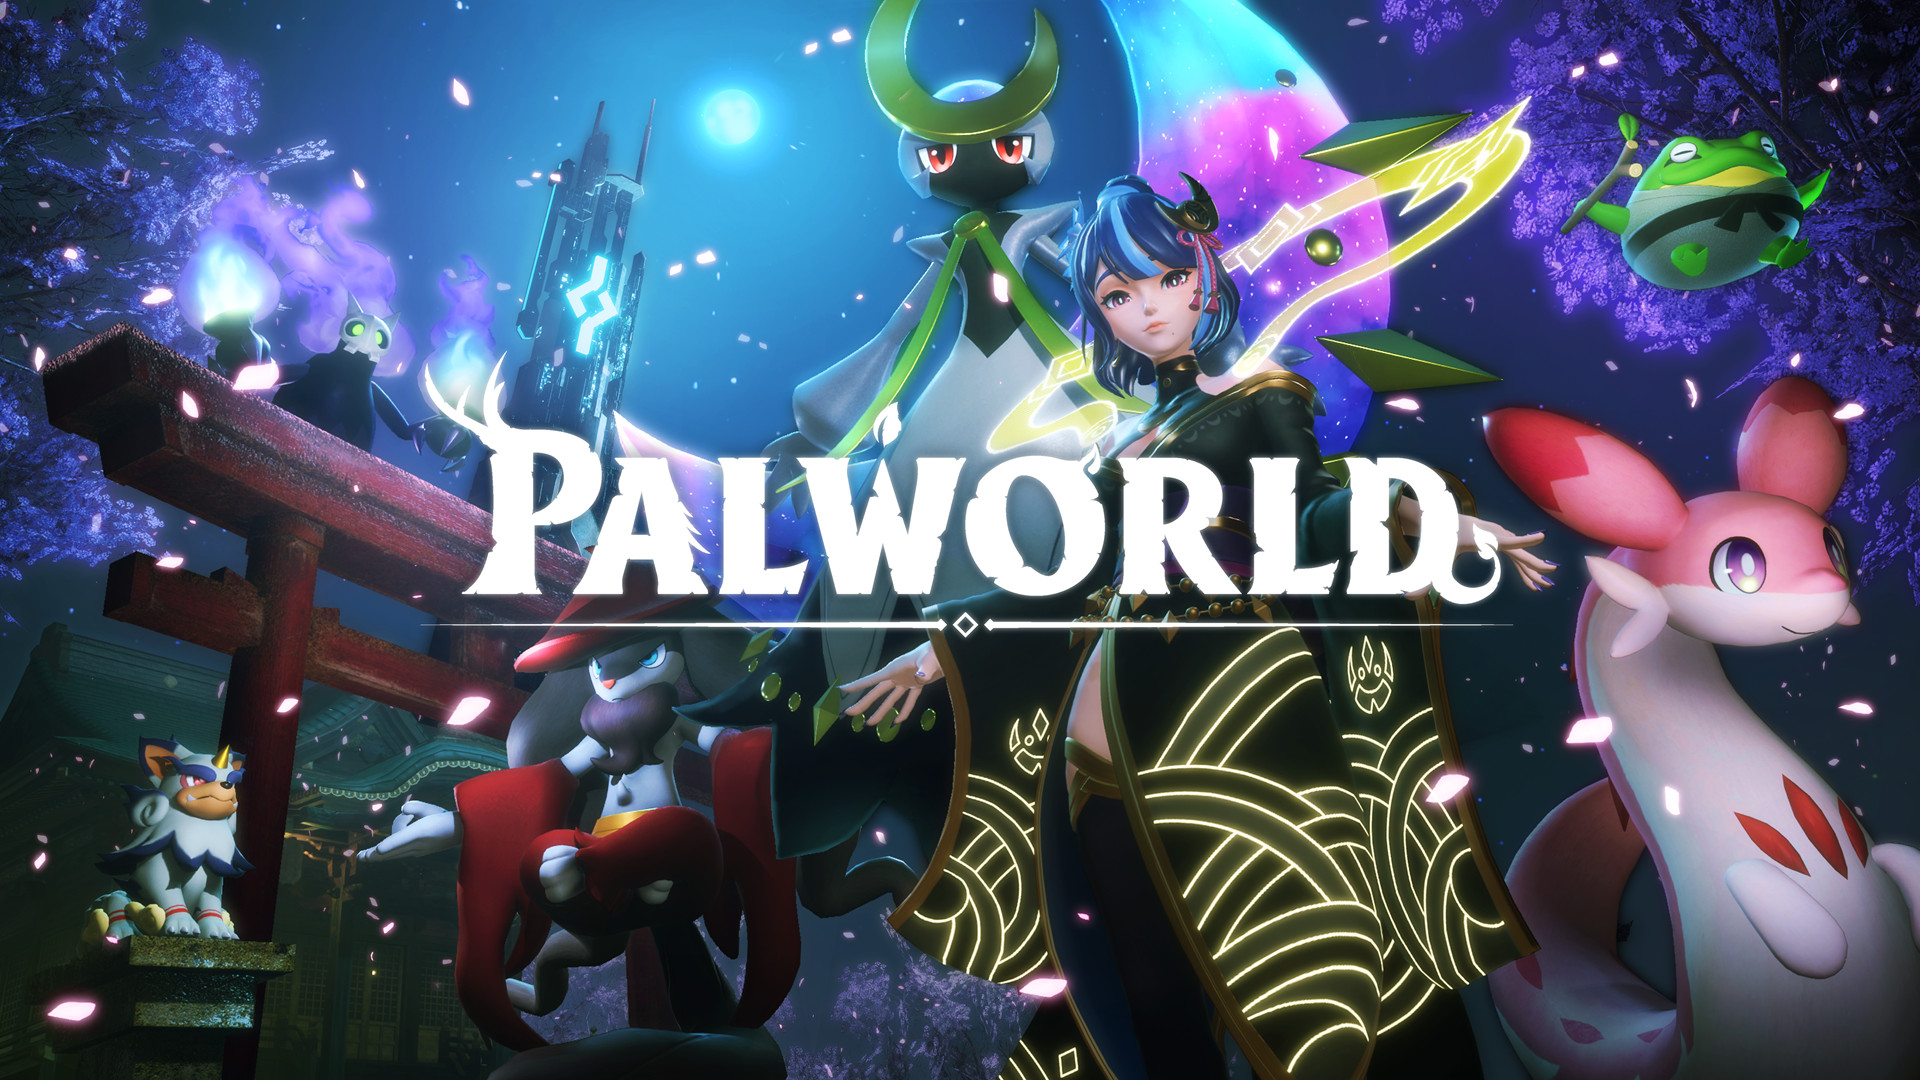 Palworld Sakurajima v0.3.1 Patch Notes – New Island, Pals, Features, and More!